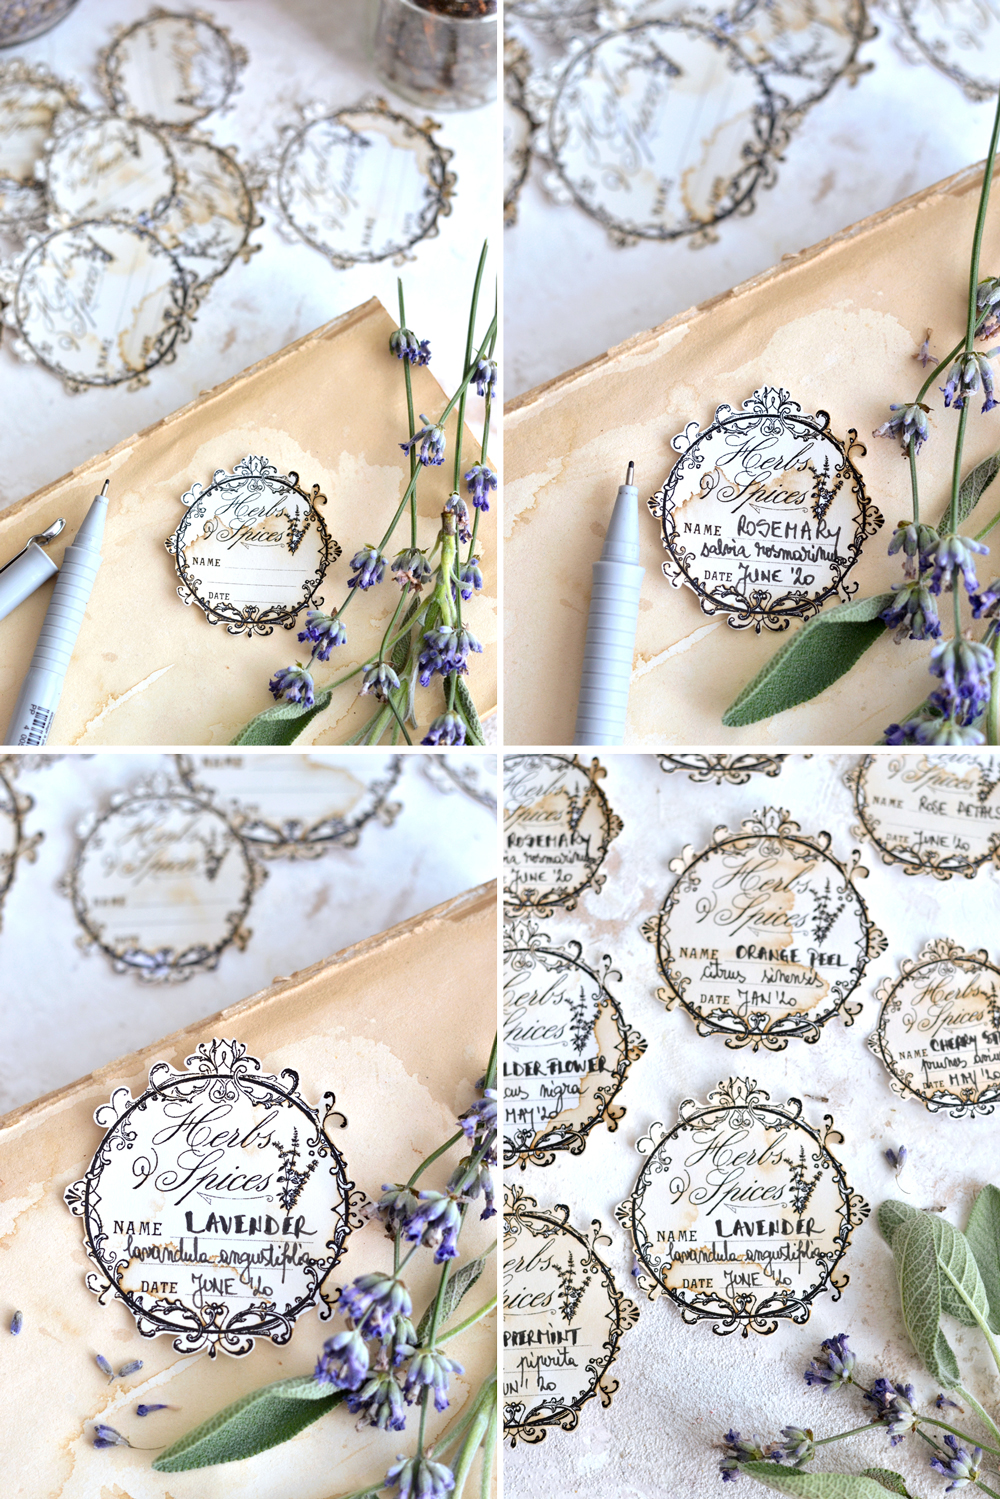 Labels with Lavender